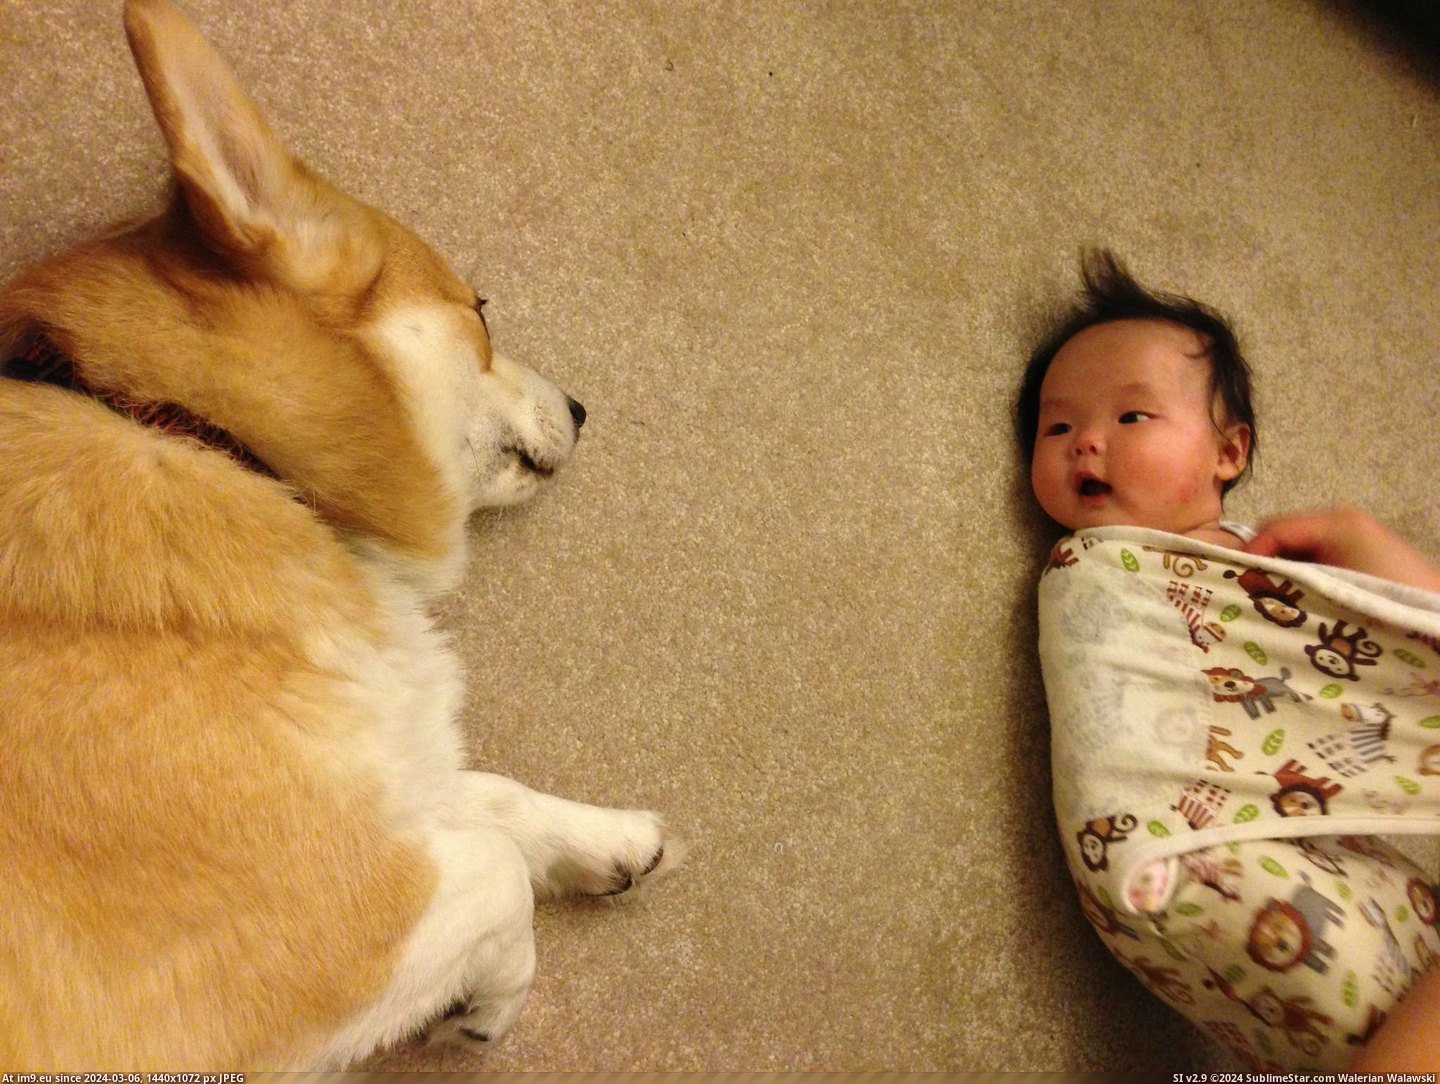 #Old #Likes #Daughter #Depressed #Counseli #Psychiatrist #Month #Corgi #Lie [Aww] My corgi likes to lie down next to my 4 month old daughter. It looks like he's depressed and she's a psychiatrist counseli Pic. (Image of album My r/AWW favs))